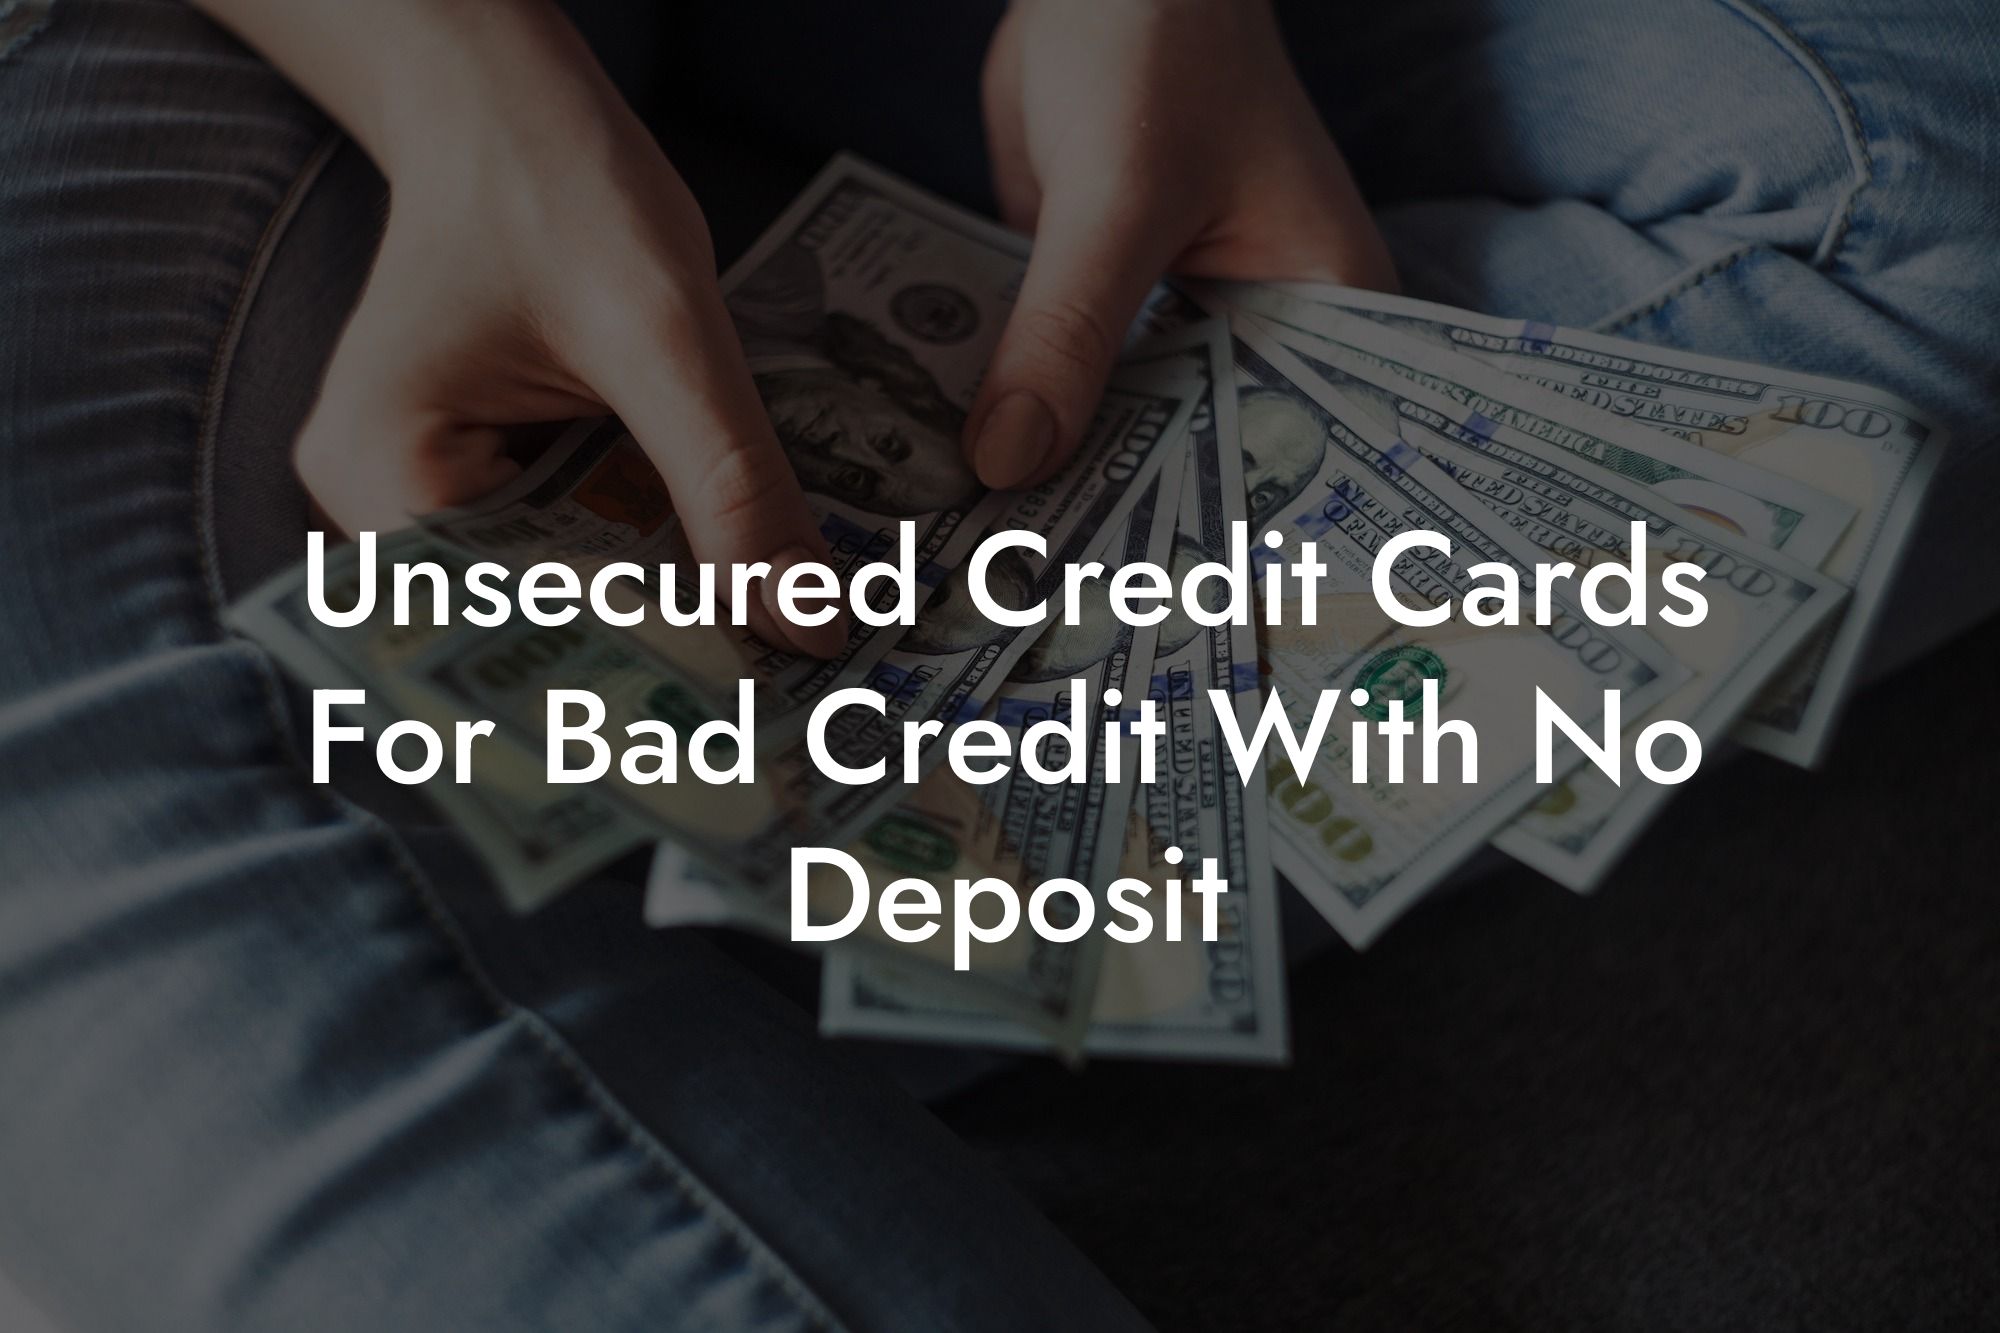 Unsecured Credit Cards For Bad Credit With No Deposit